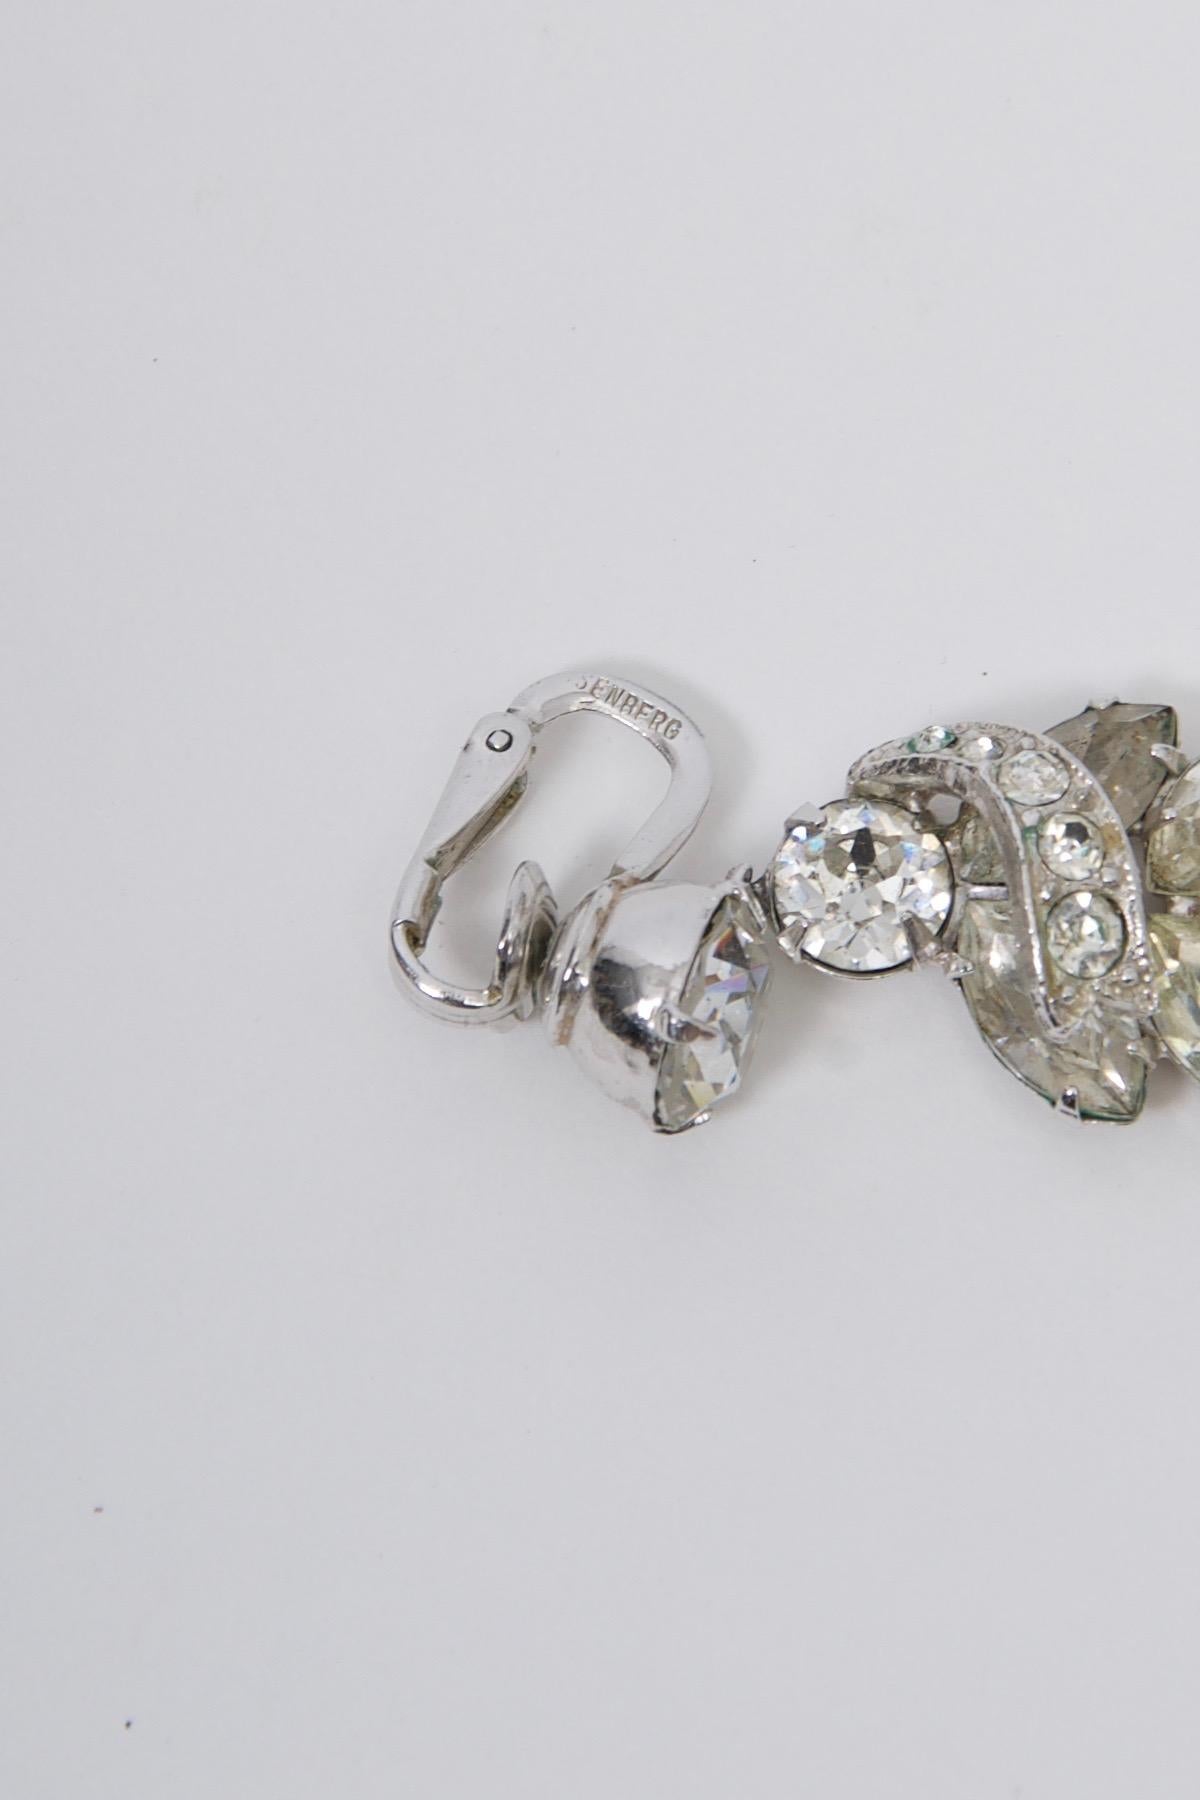 Eisenberg Rihinestone Earrings In Good Condition For Sale In Alford, MA